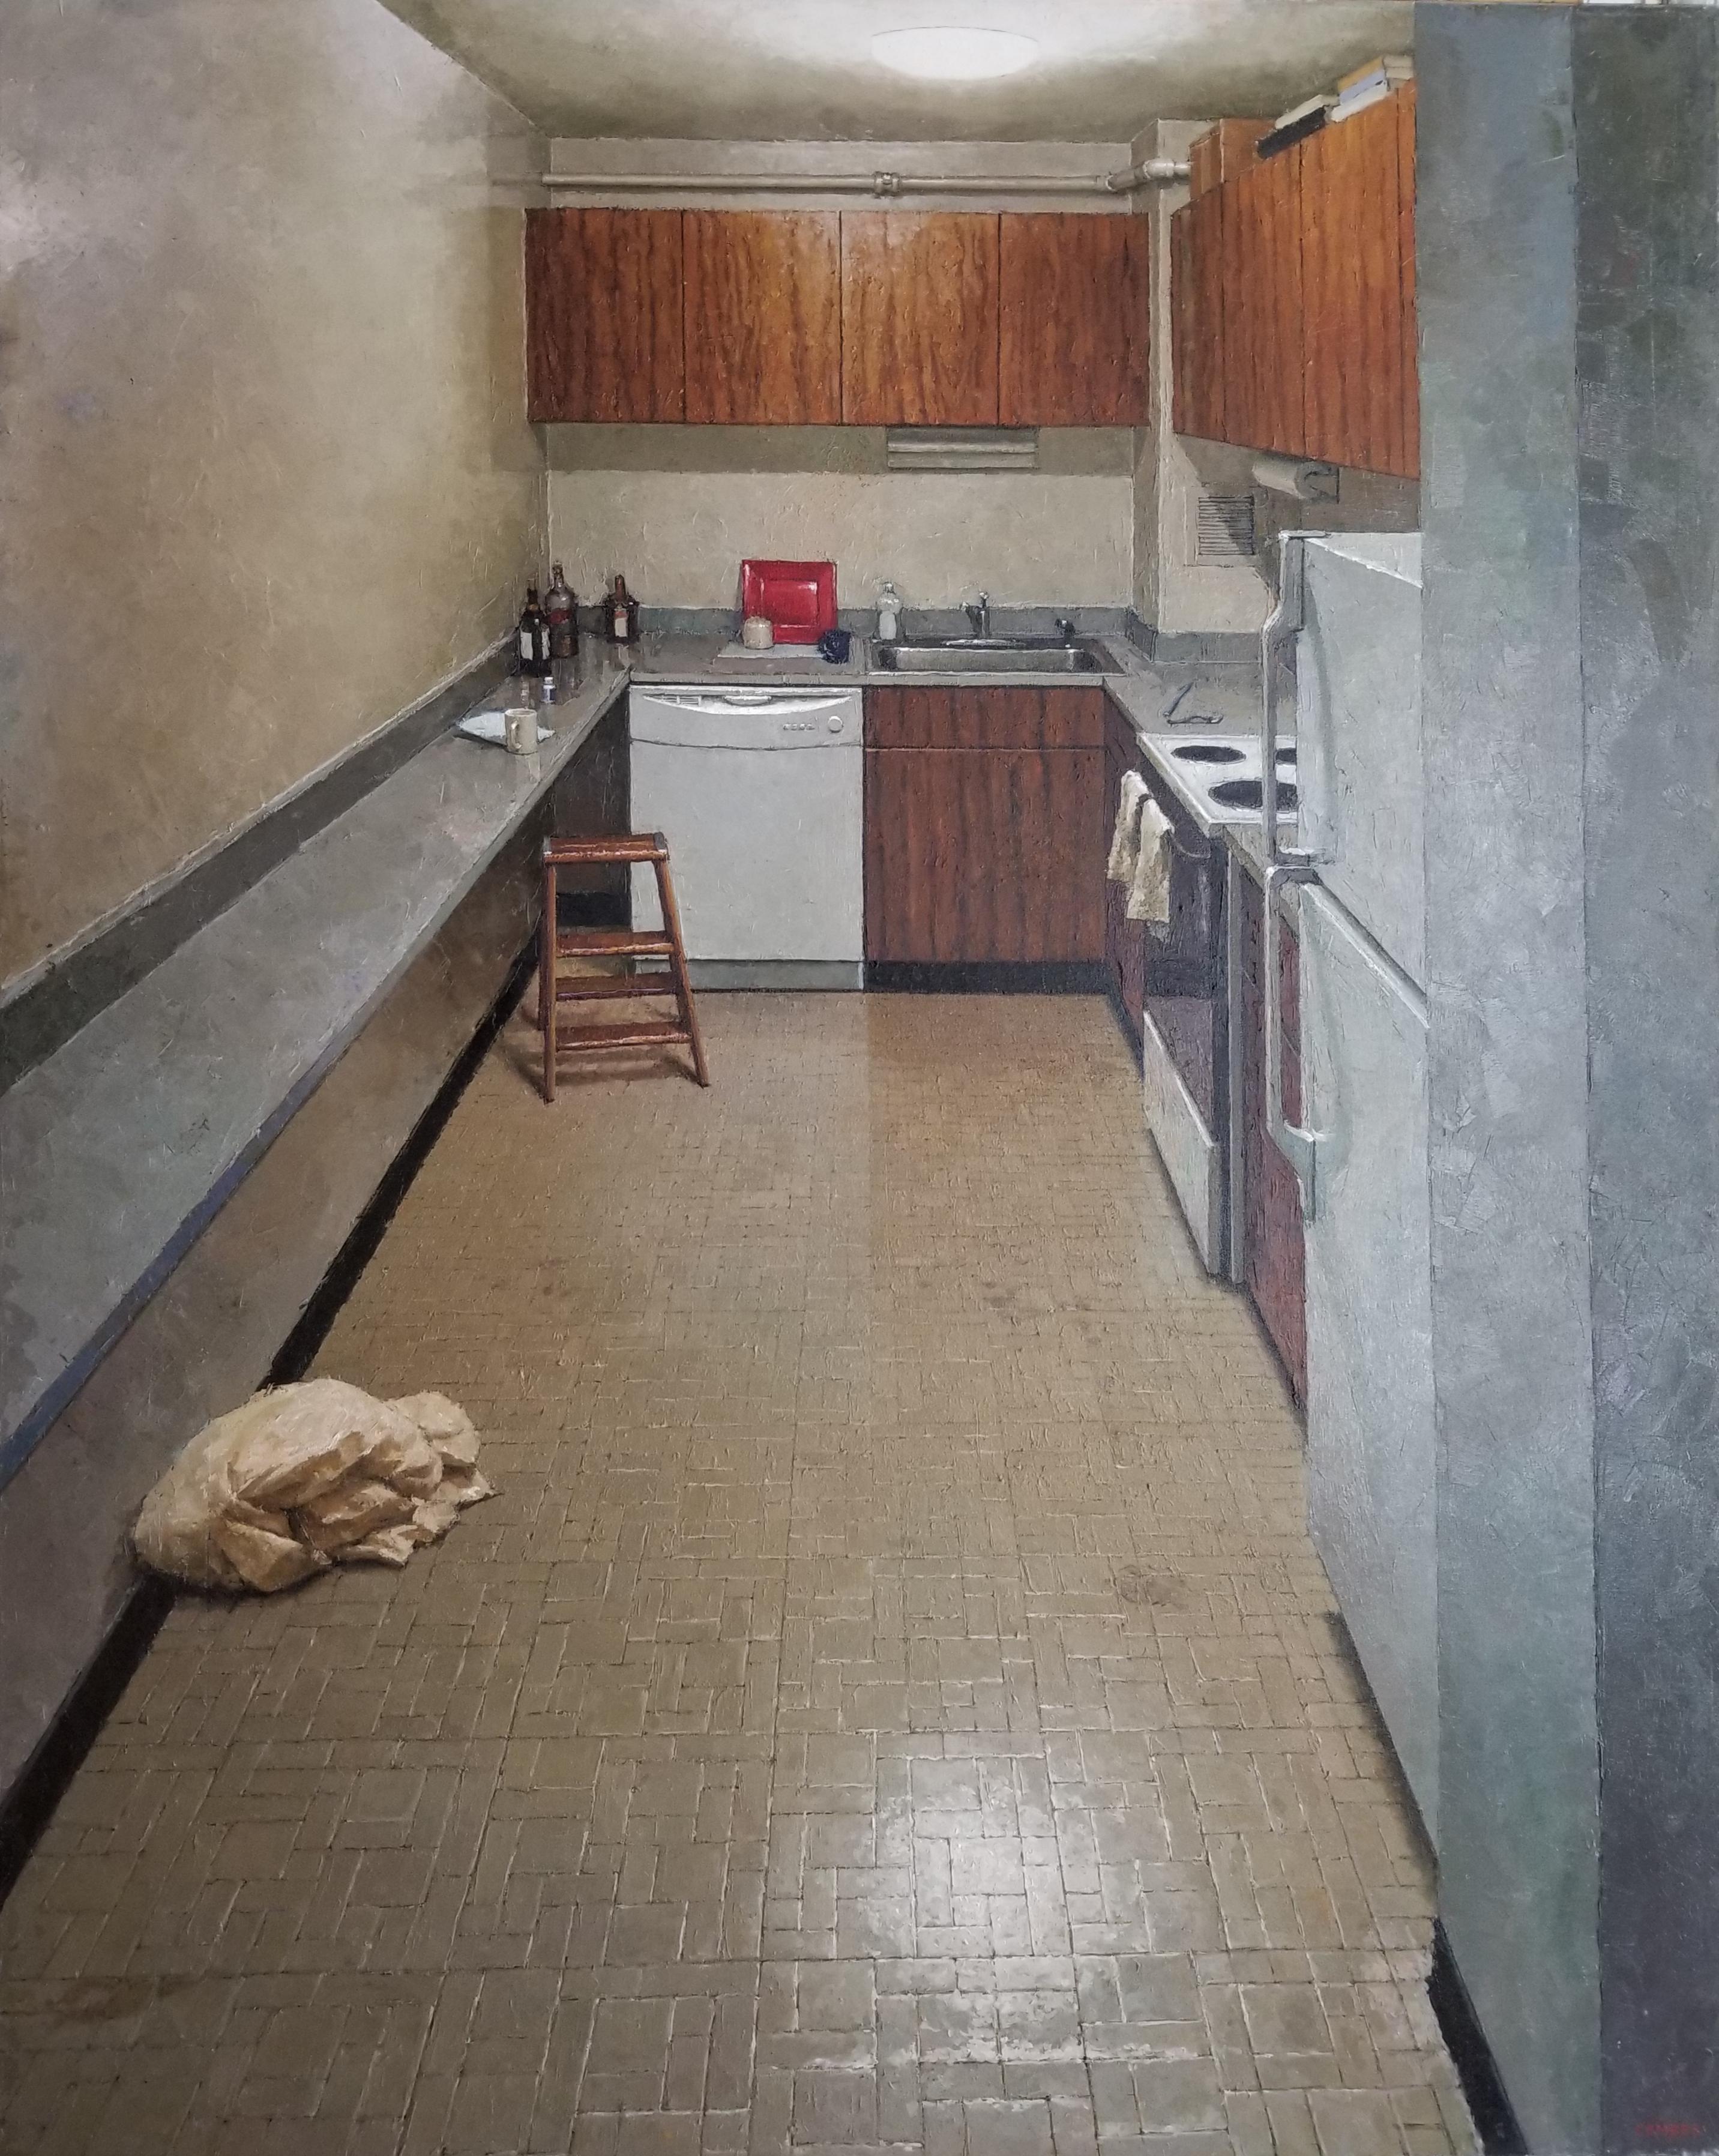 Richard Combes Interior Painting - THE KITCHEN, NYC - Interior / Tiles / Pattern / Realism / Sink / Rustic